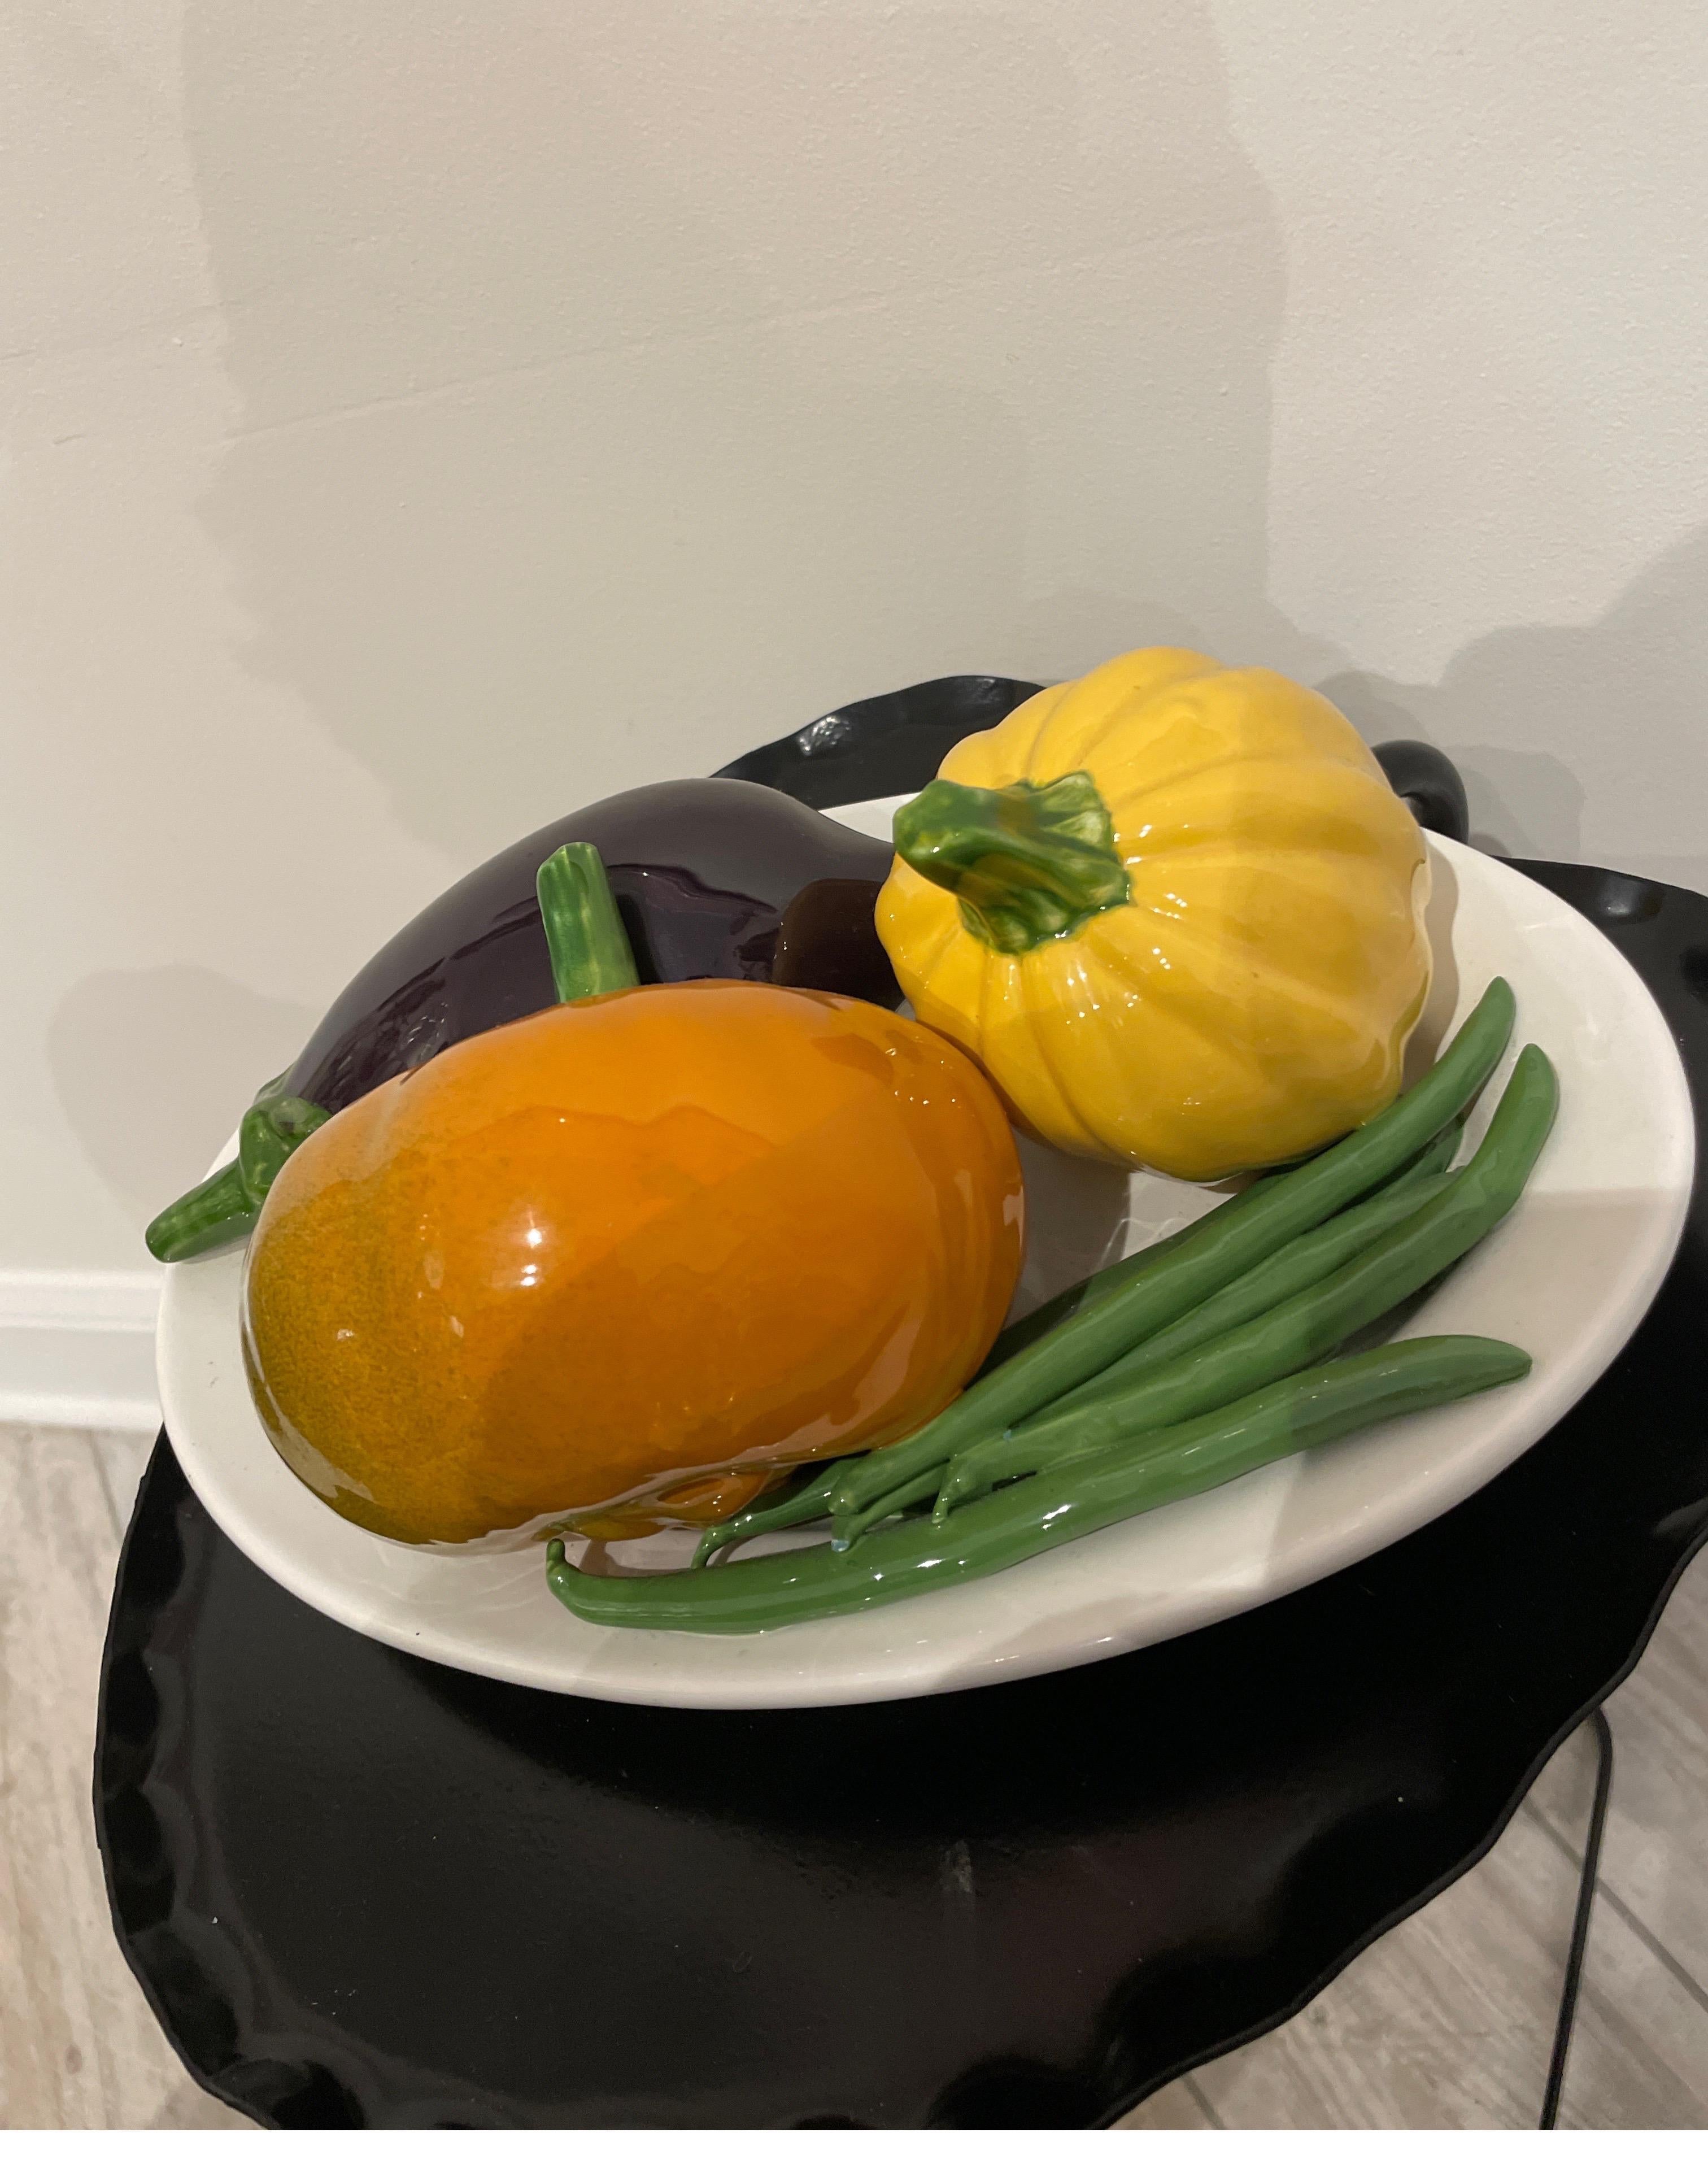 Vintage oval Trompe L'oeil platter with eggplant, squash & green beans on a white background. This very fine piece stands on it's own & would be a great addition to your collection.